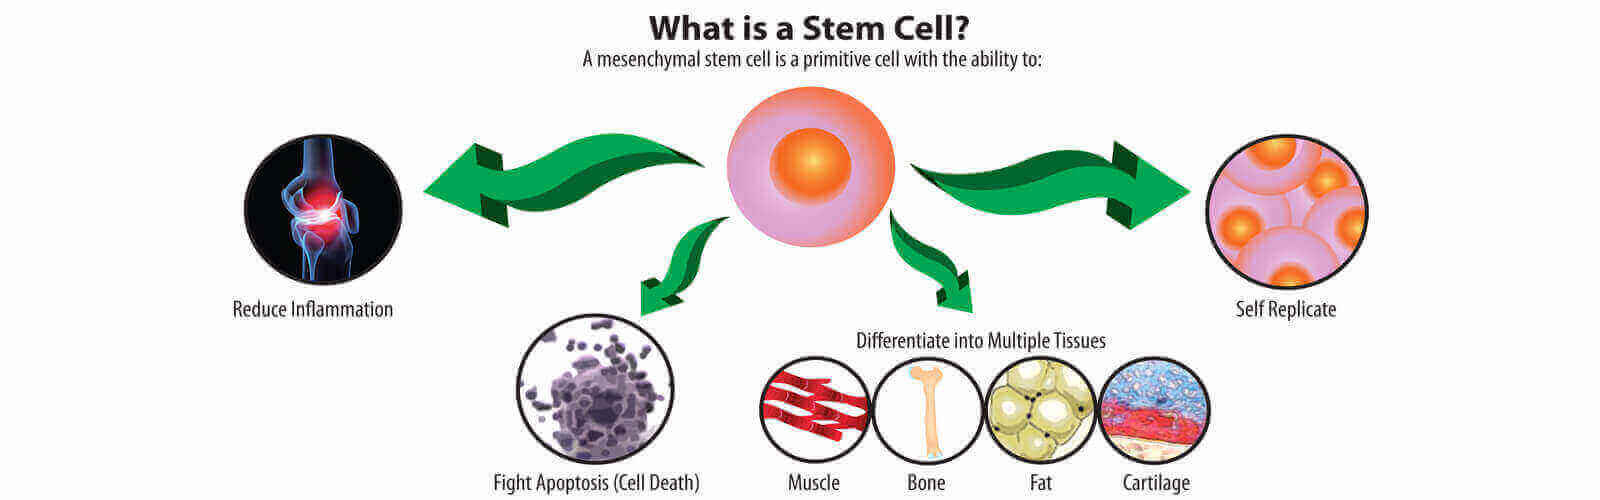 Stem Cell Treatment in Hollywood